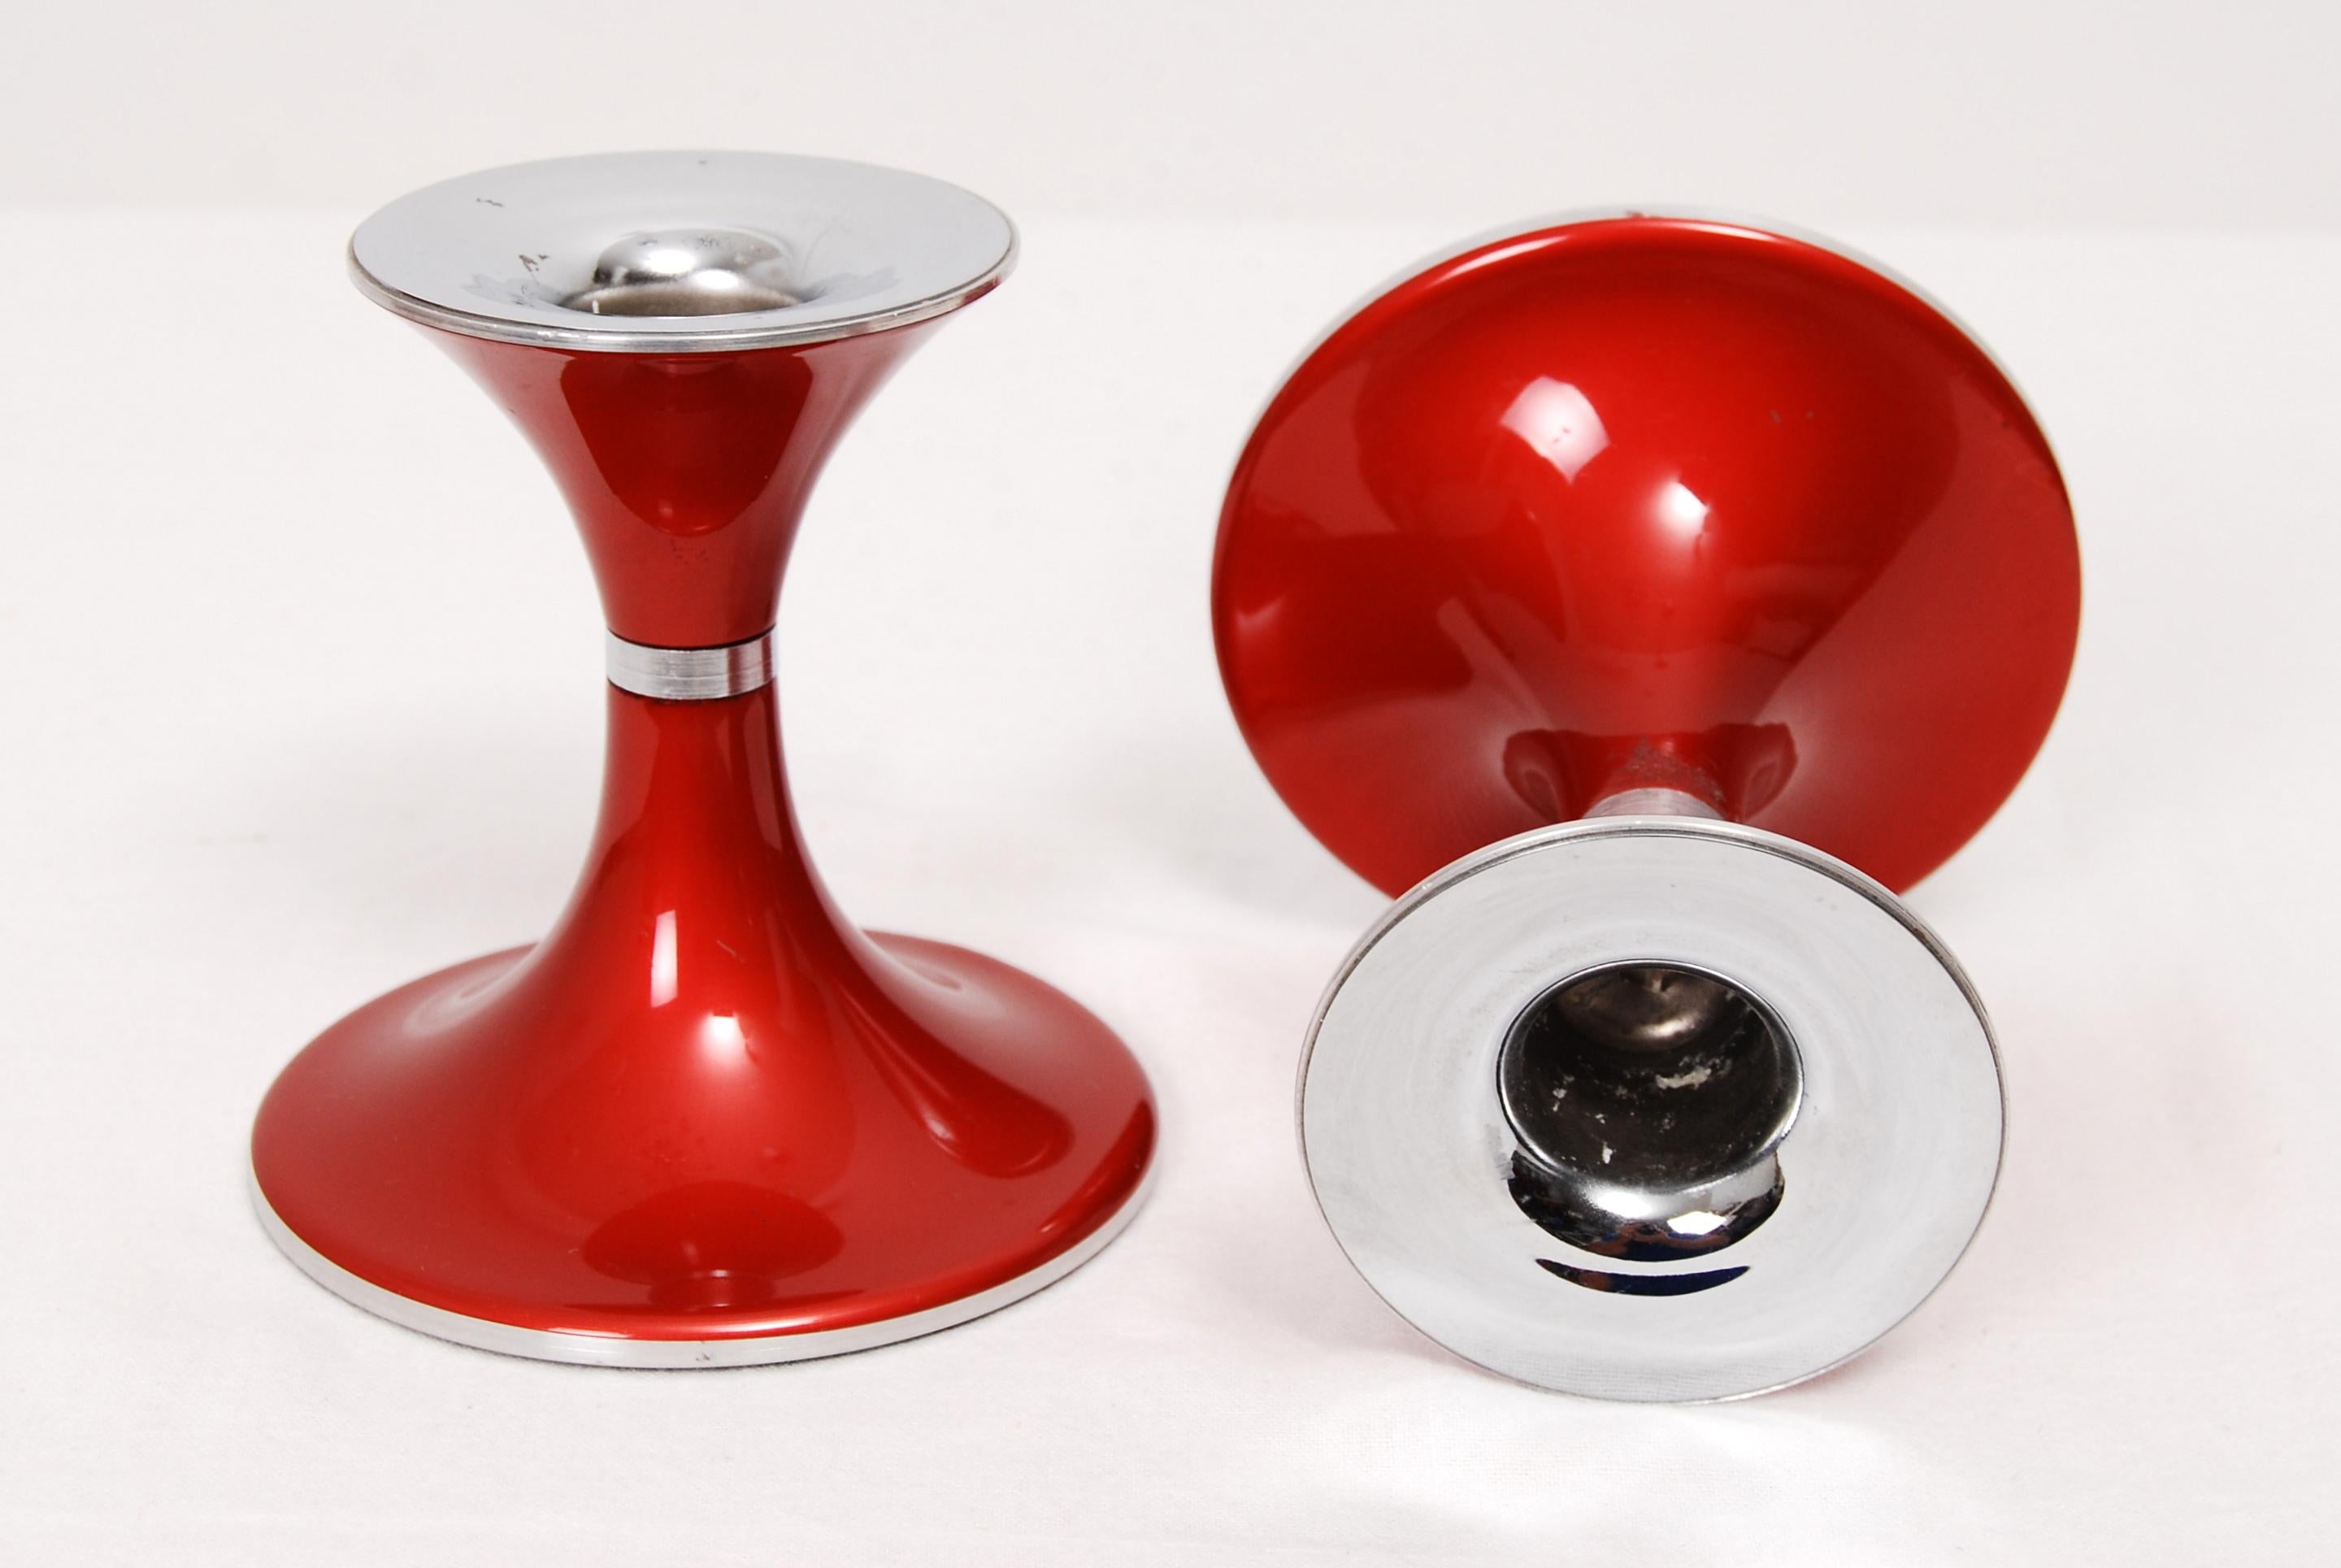 Vintage mid-century modern pair of candlestick holders by Emalox Norway. Aluminium with red enamel. Very good condition with felt on the bottoms and each measures 4 inches tall.